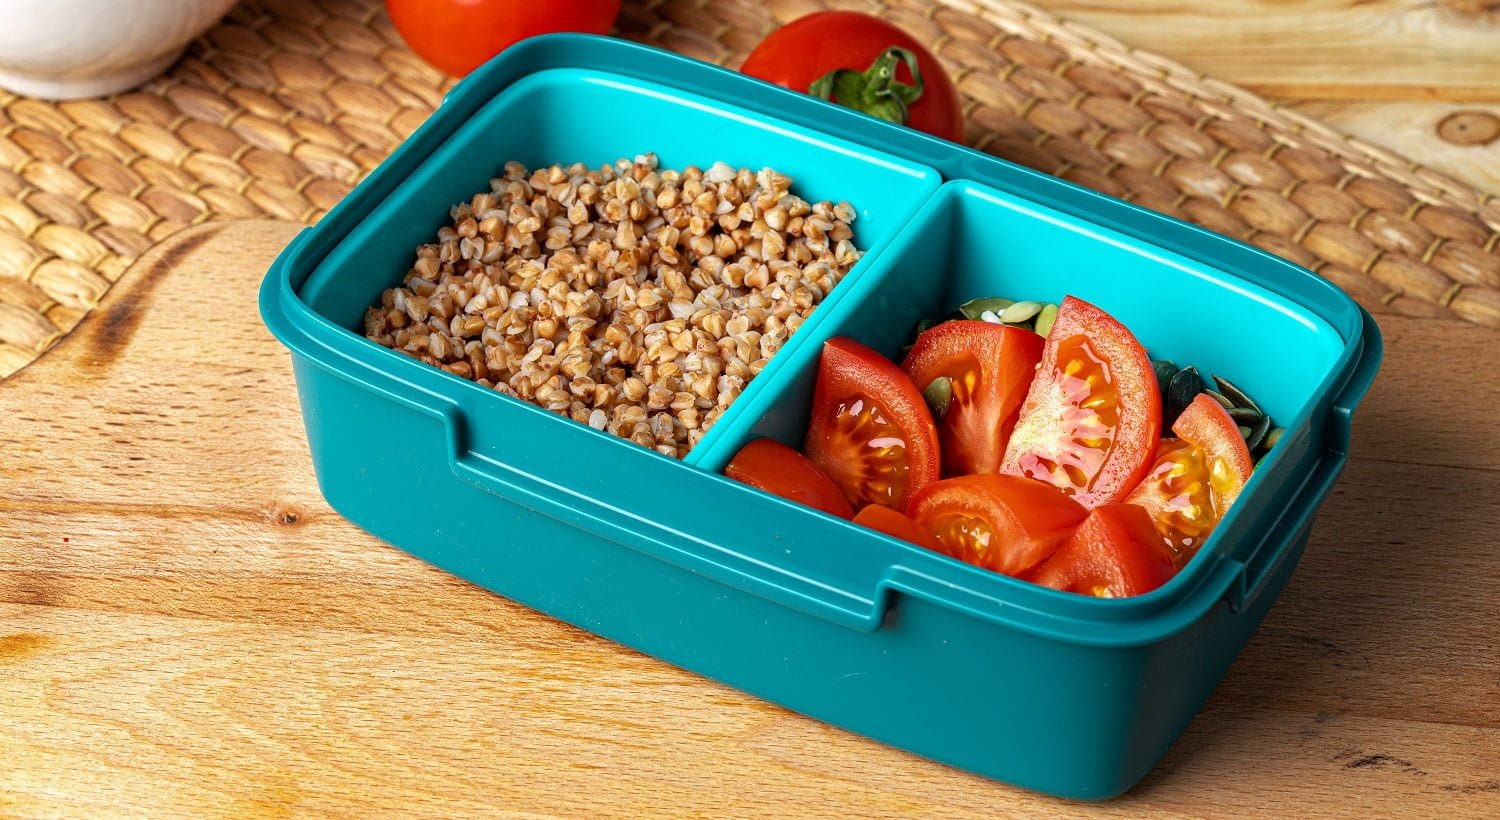 Blue lunch box with buckwheat and tomatoes, healthy eating